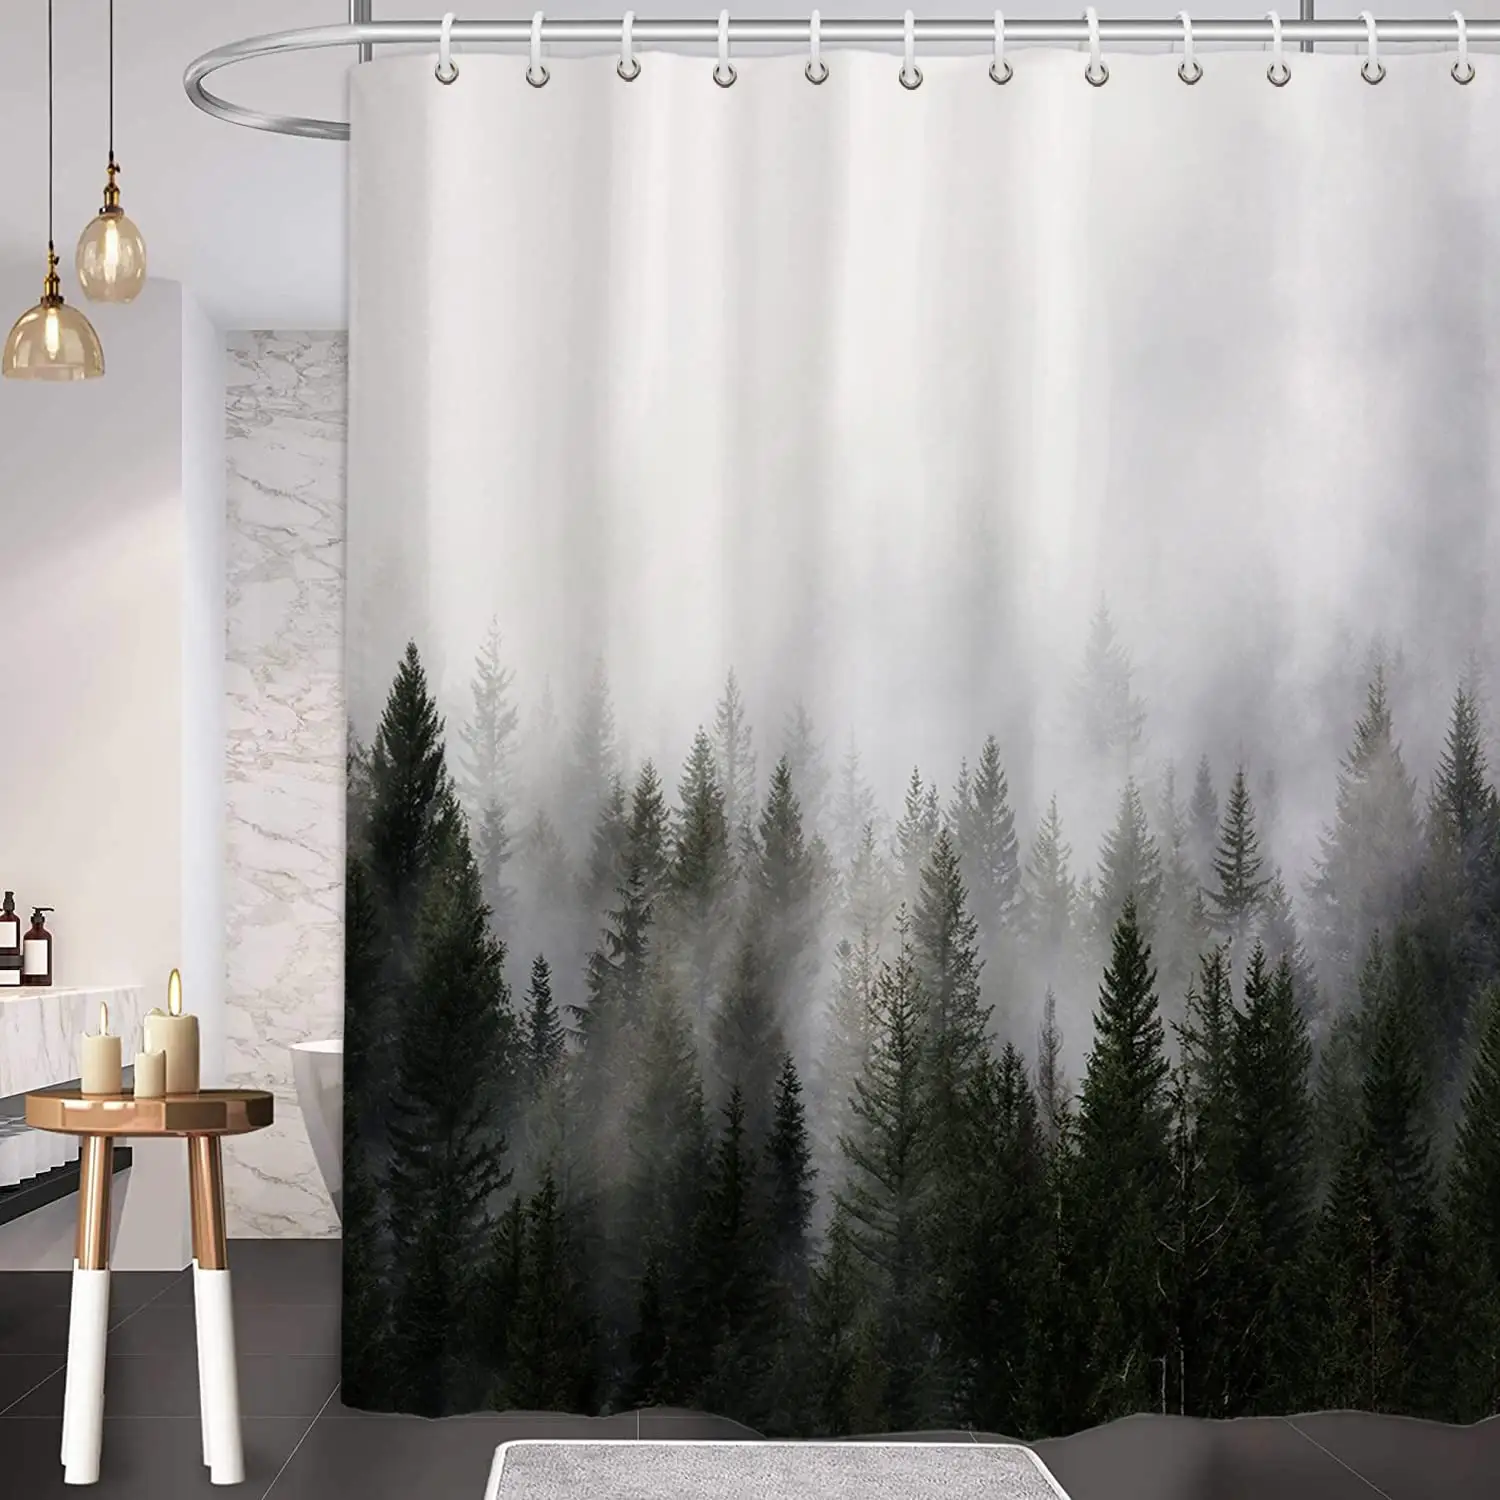 Misty Forest Shower Curtains Flower Shower Curtain Waterproof Polyester Fabric Bath Curtain for Bathroom